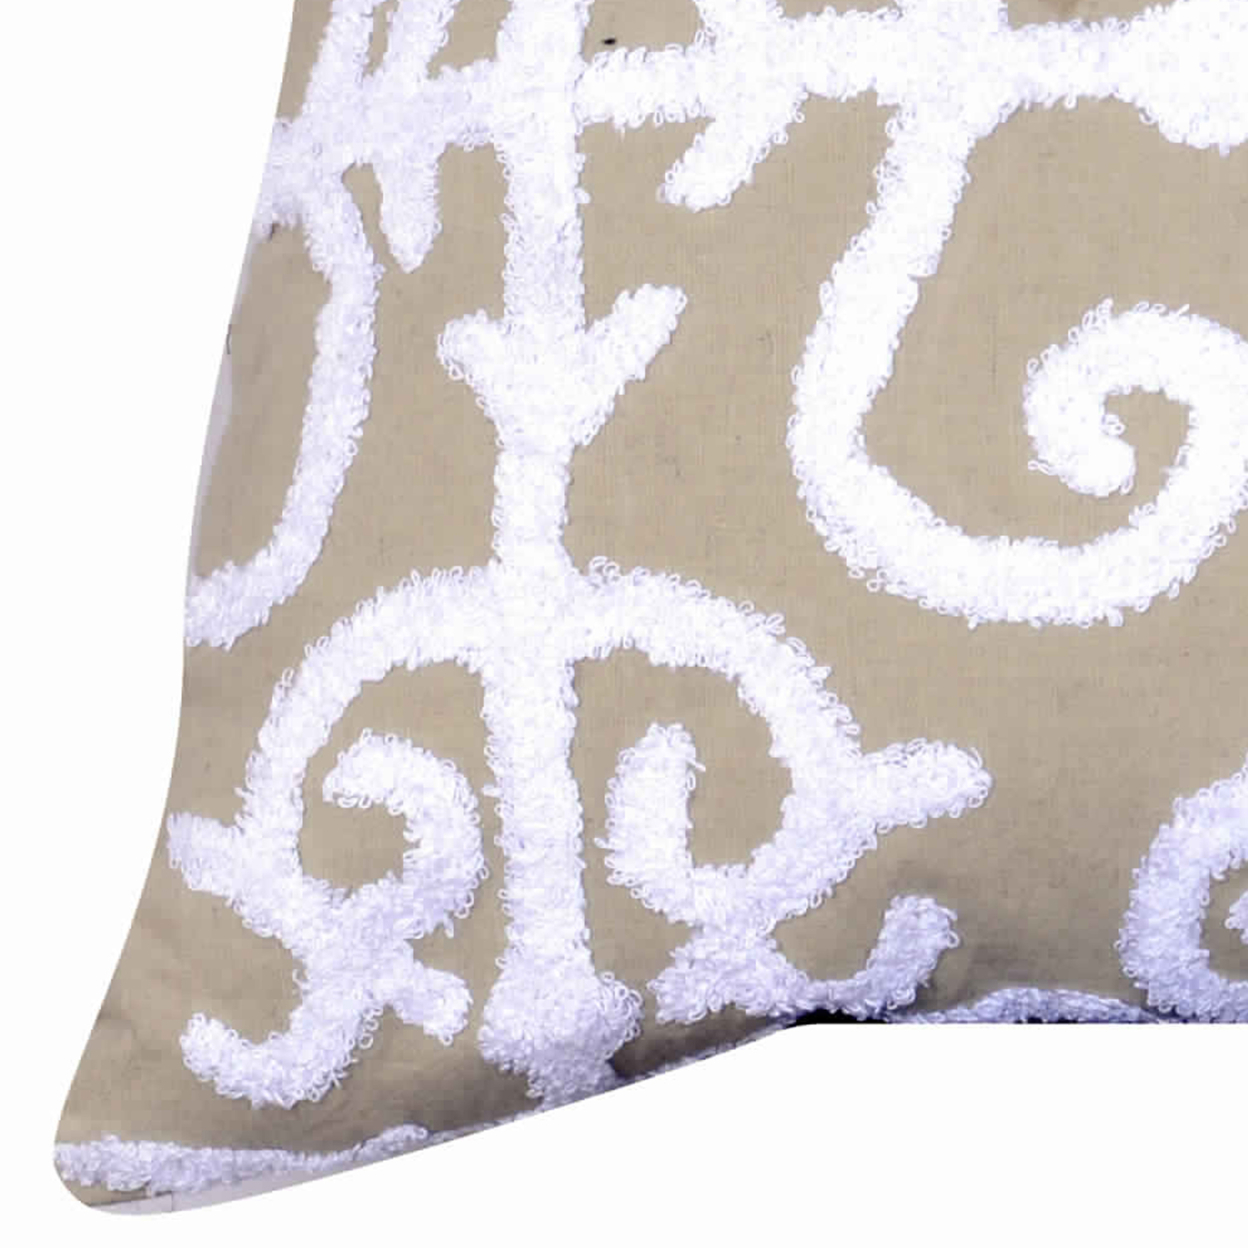 20 X 16 Inch Cotton Pillow With Vermicular Pattern, Set Of 2, Brown And White- Saltoro Sherpi